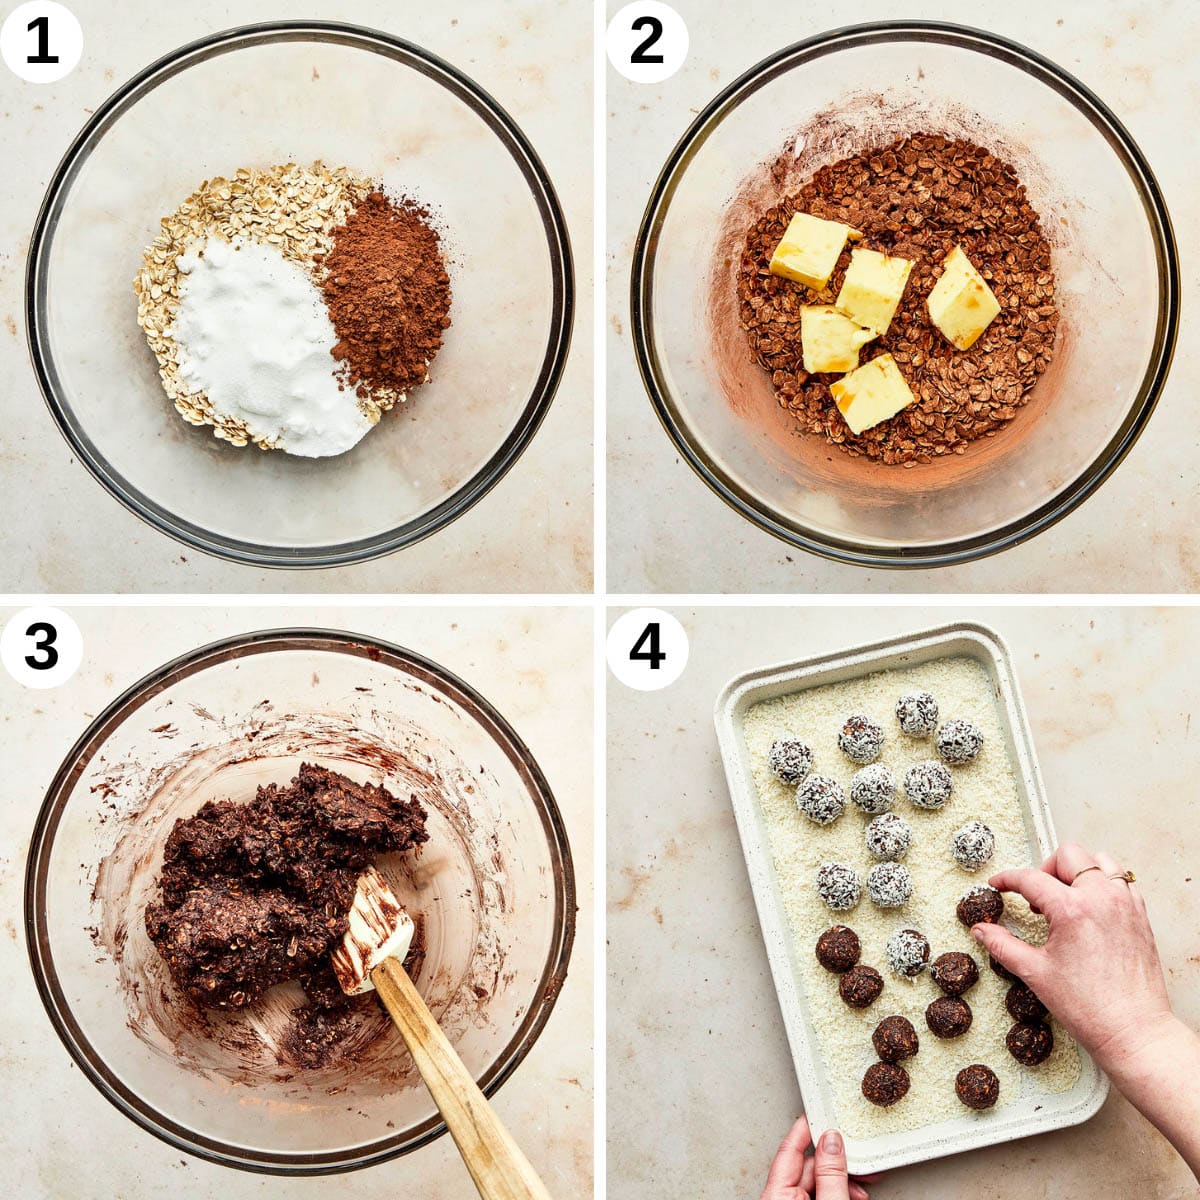 Steps 1 to 4, mixing the dry ingredients, mixing in butter, and coating the balls in coconut.